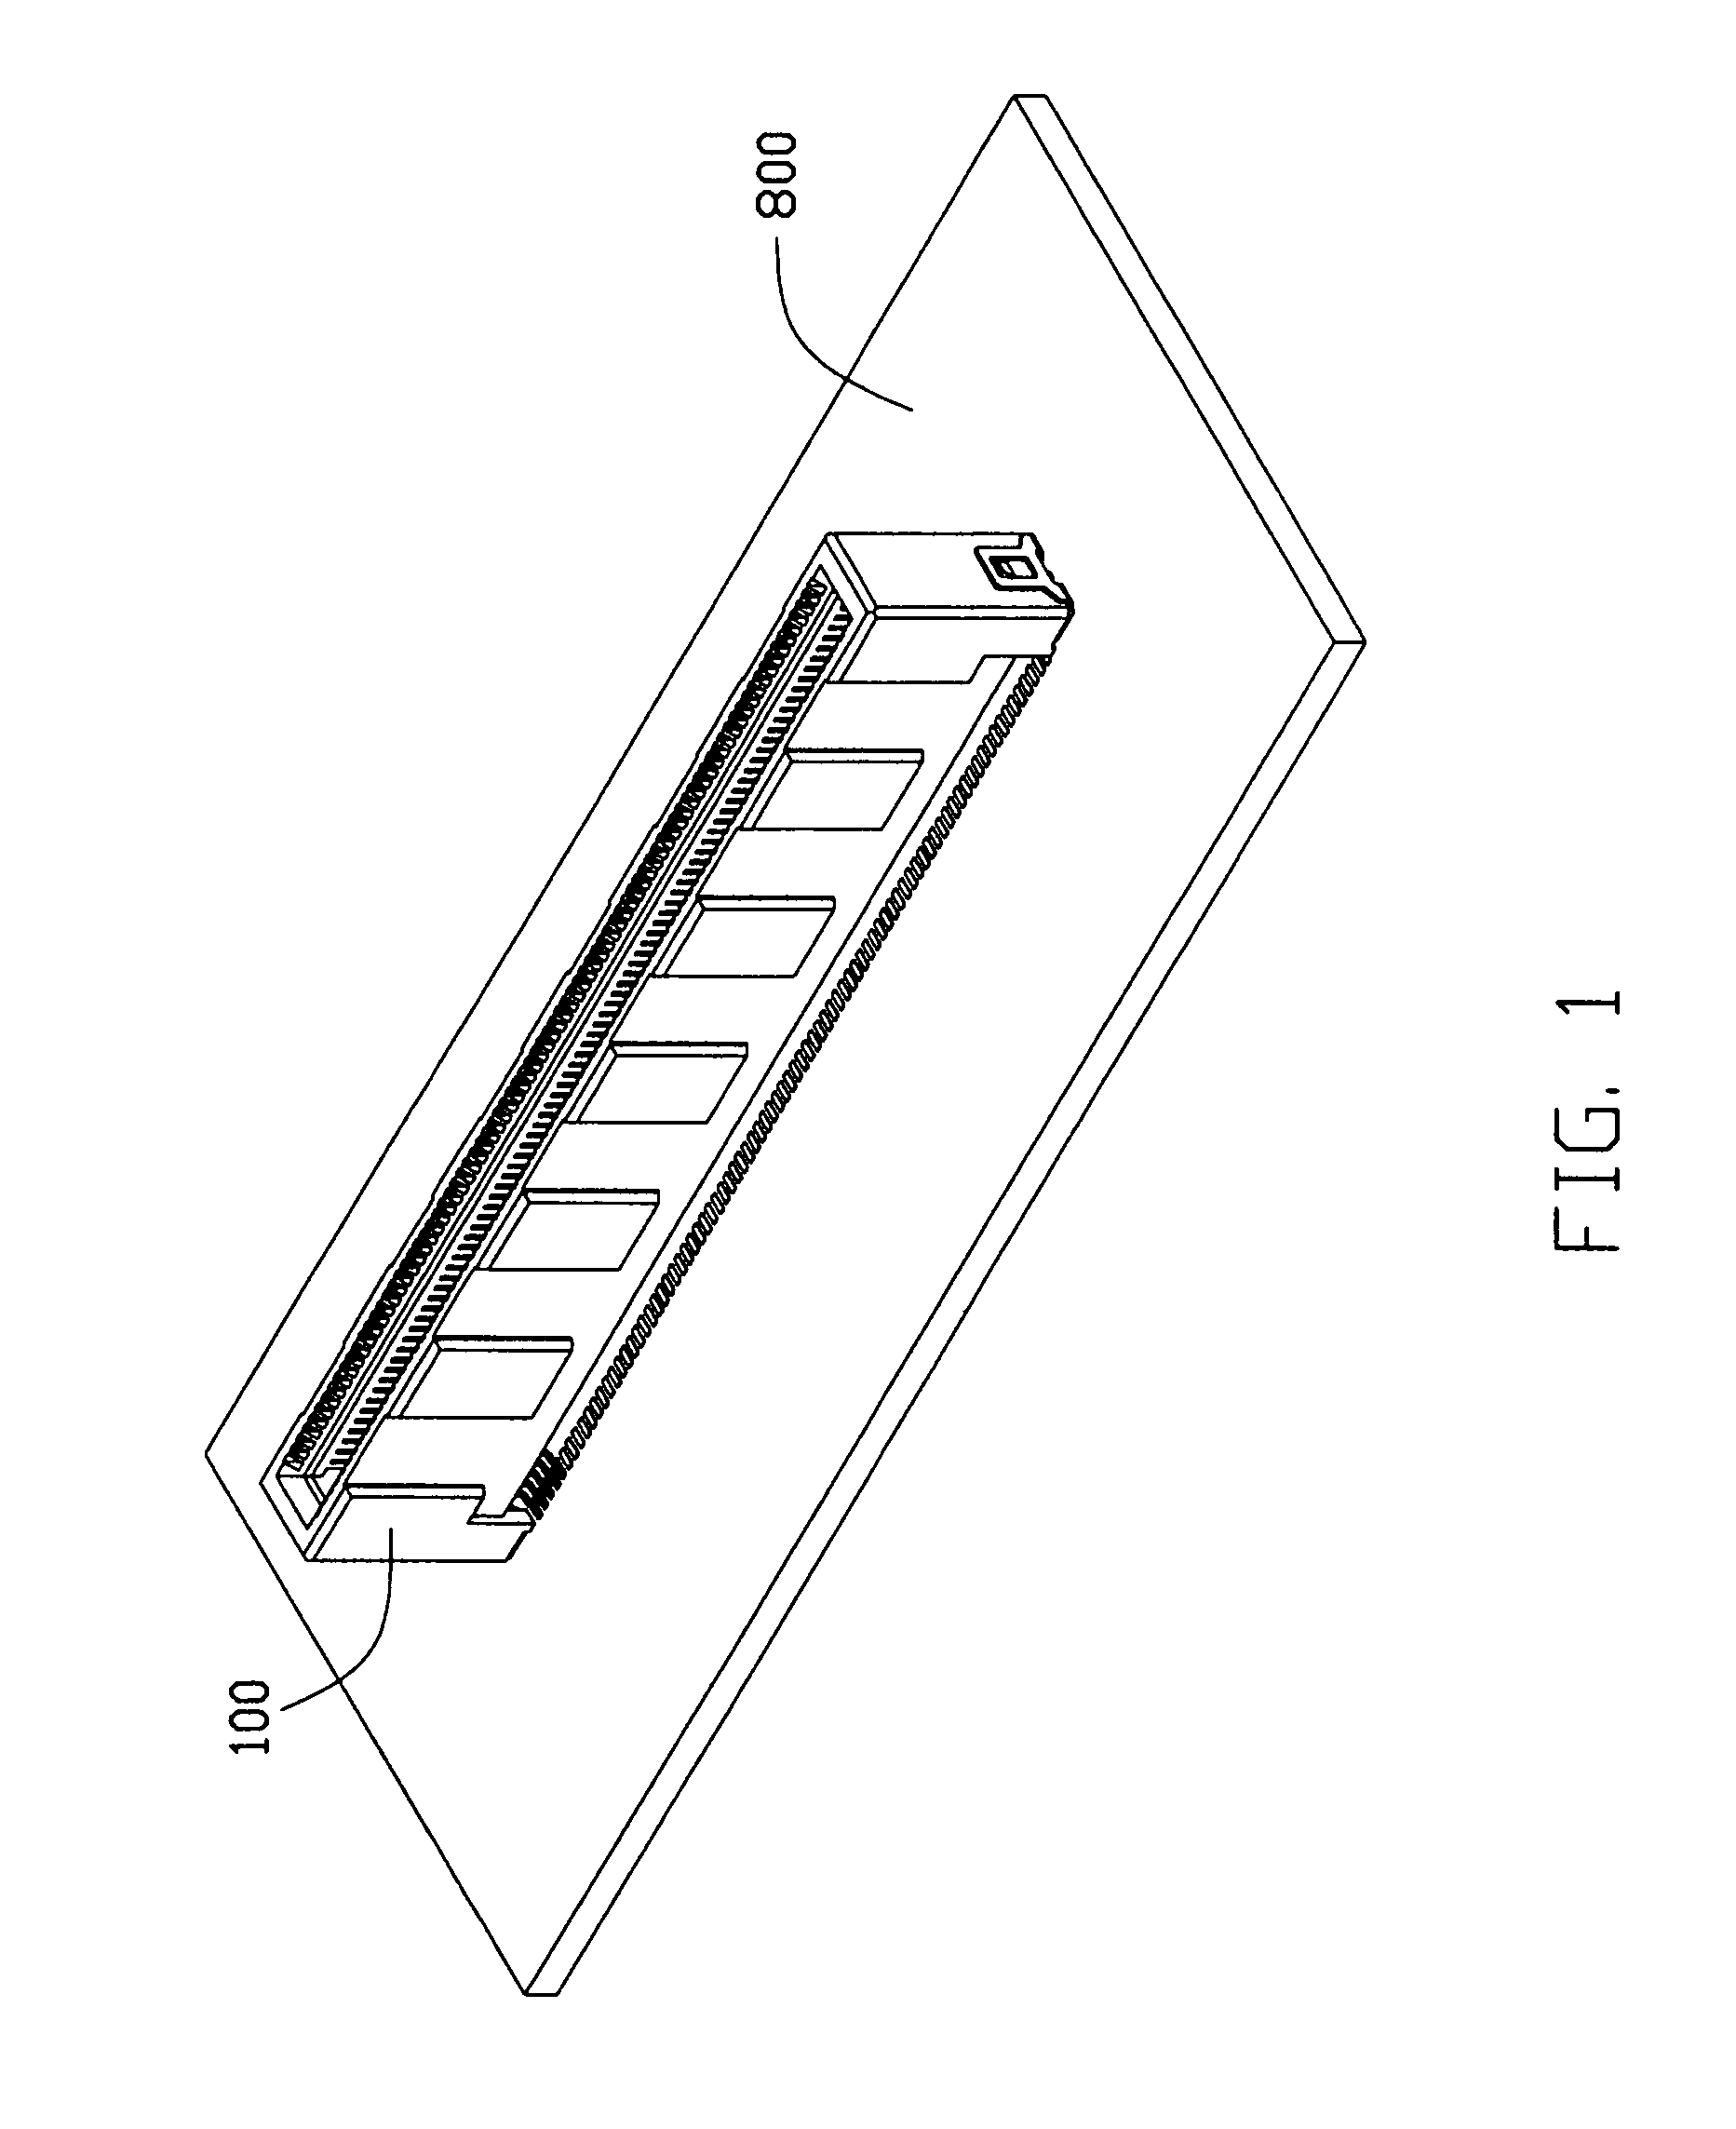 Electrical connector with improved preloading structure